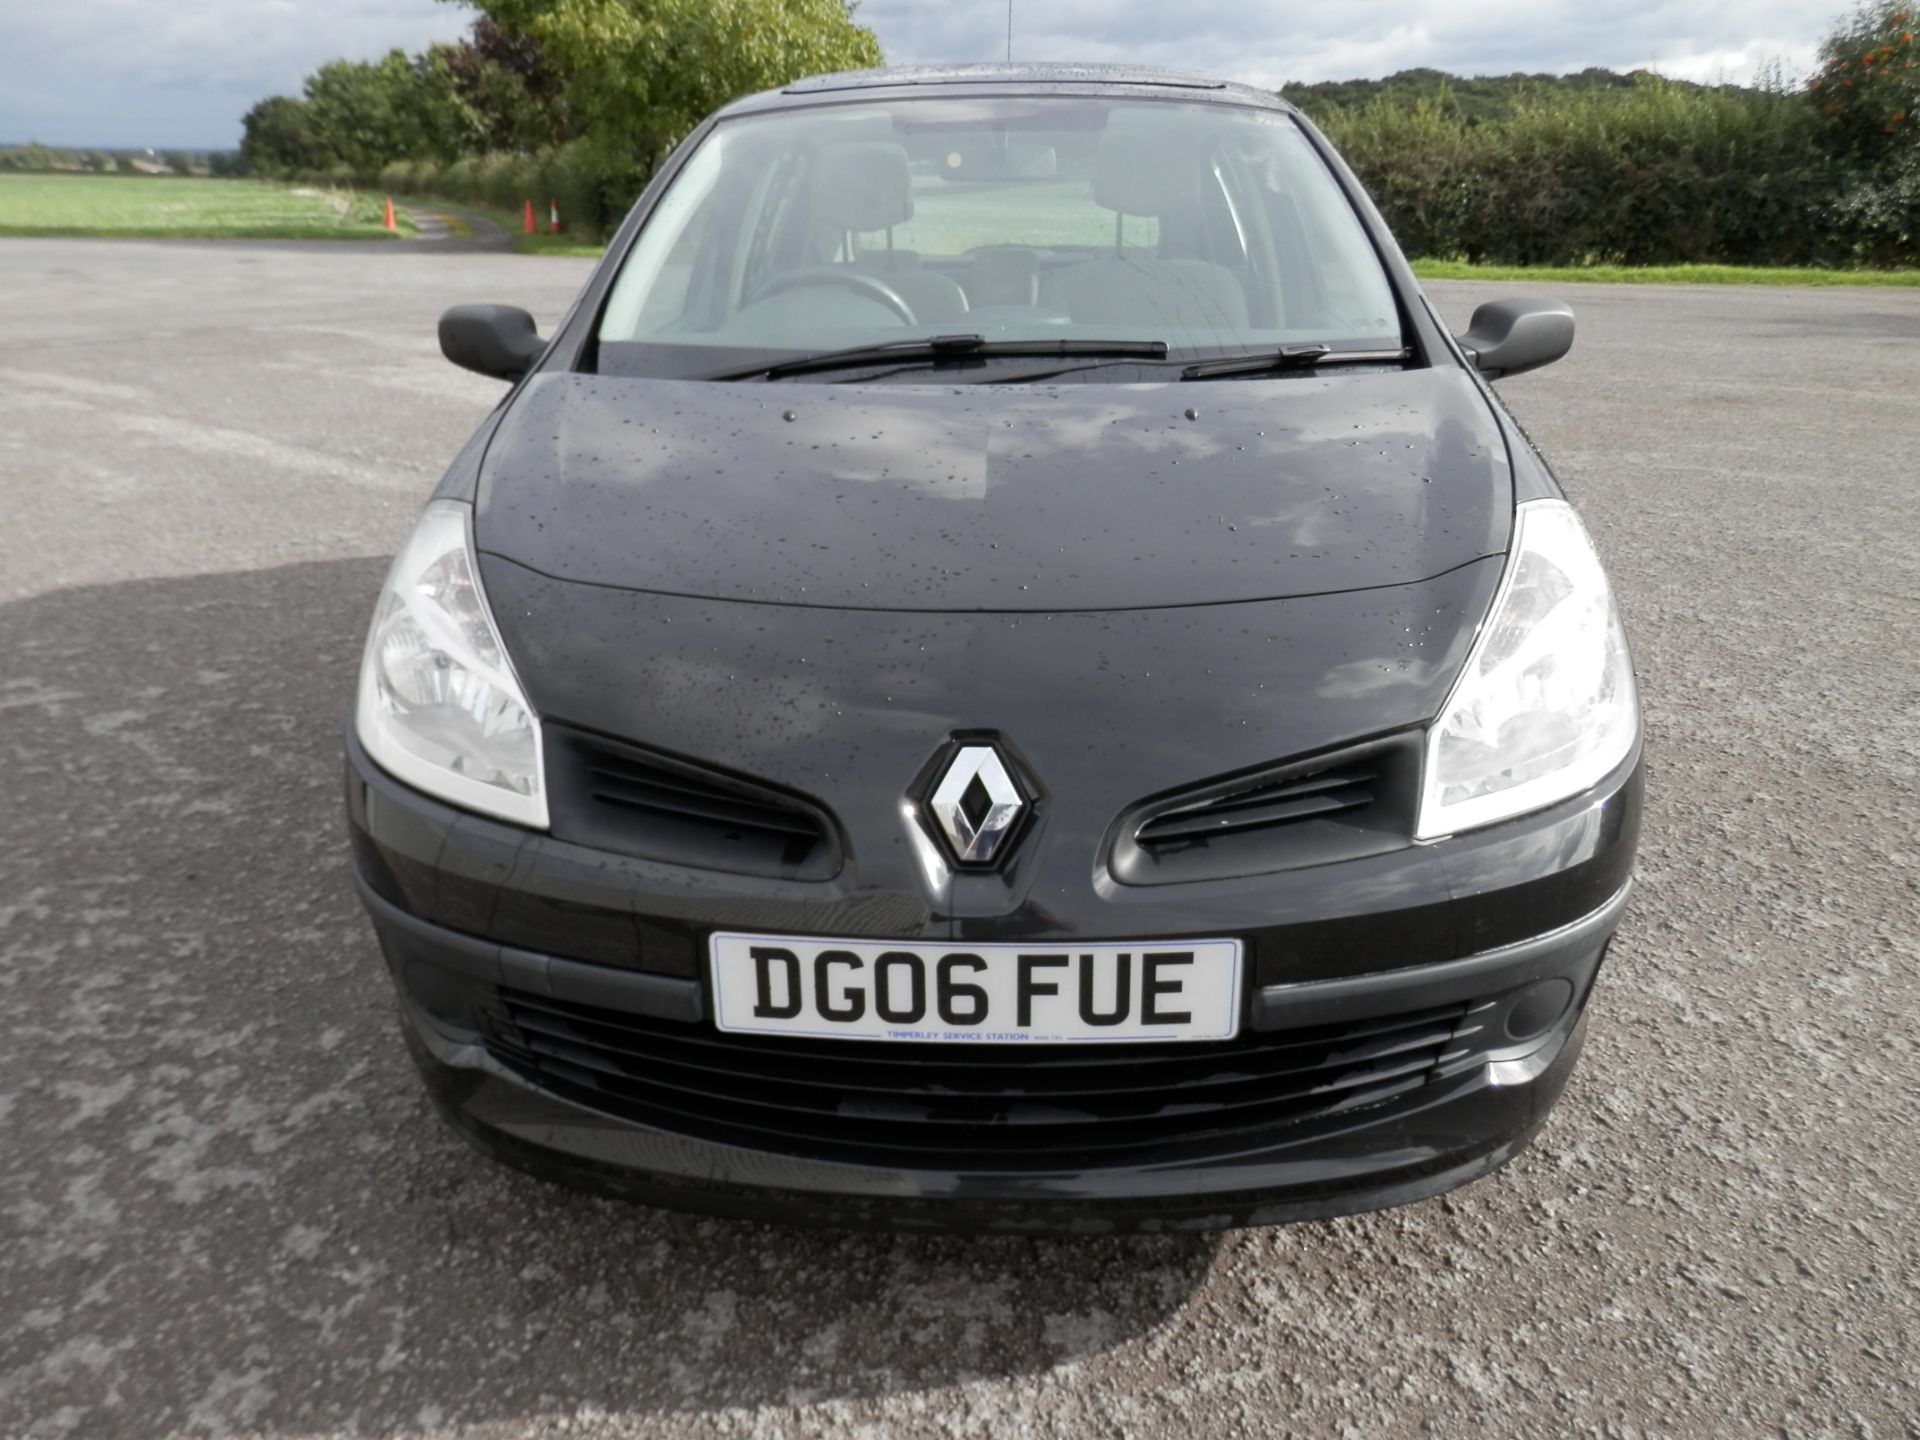 06/2006 RENAULT CLIO (FACELIFT MODEL) 1.4 EXPRESSION 16 VALVE, AIR CON, ONLY 47K MILES WARRANTED. - Image 2 of 26